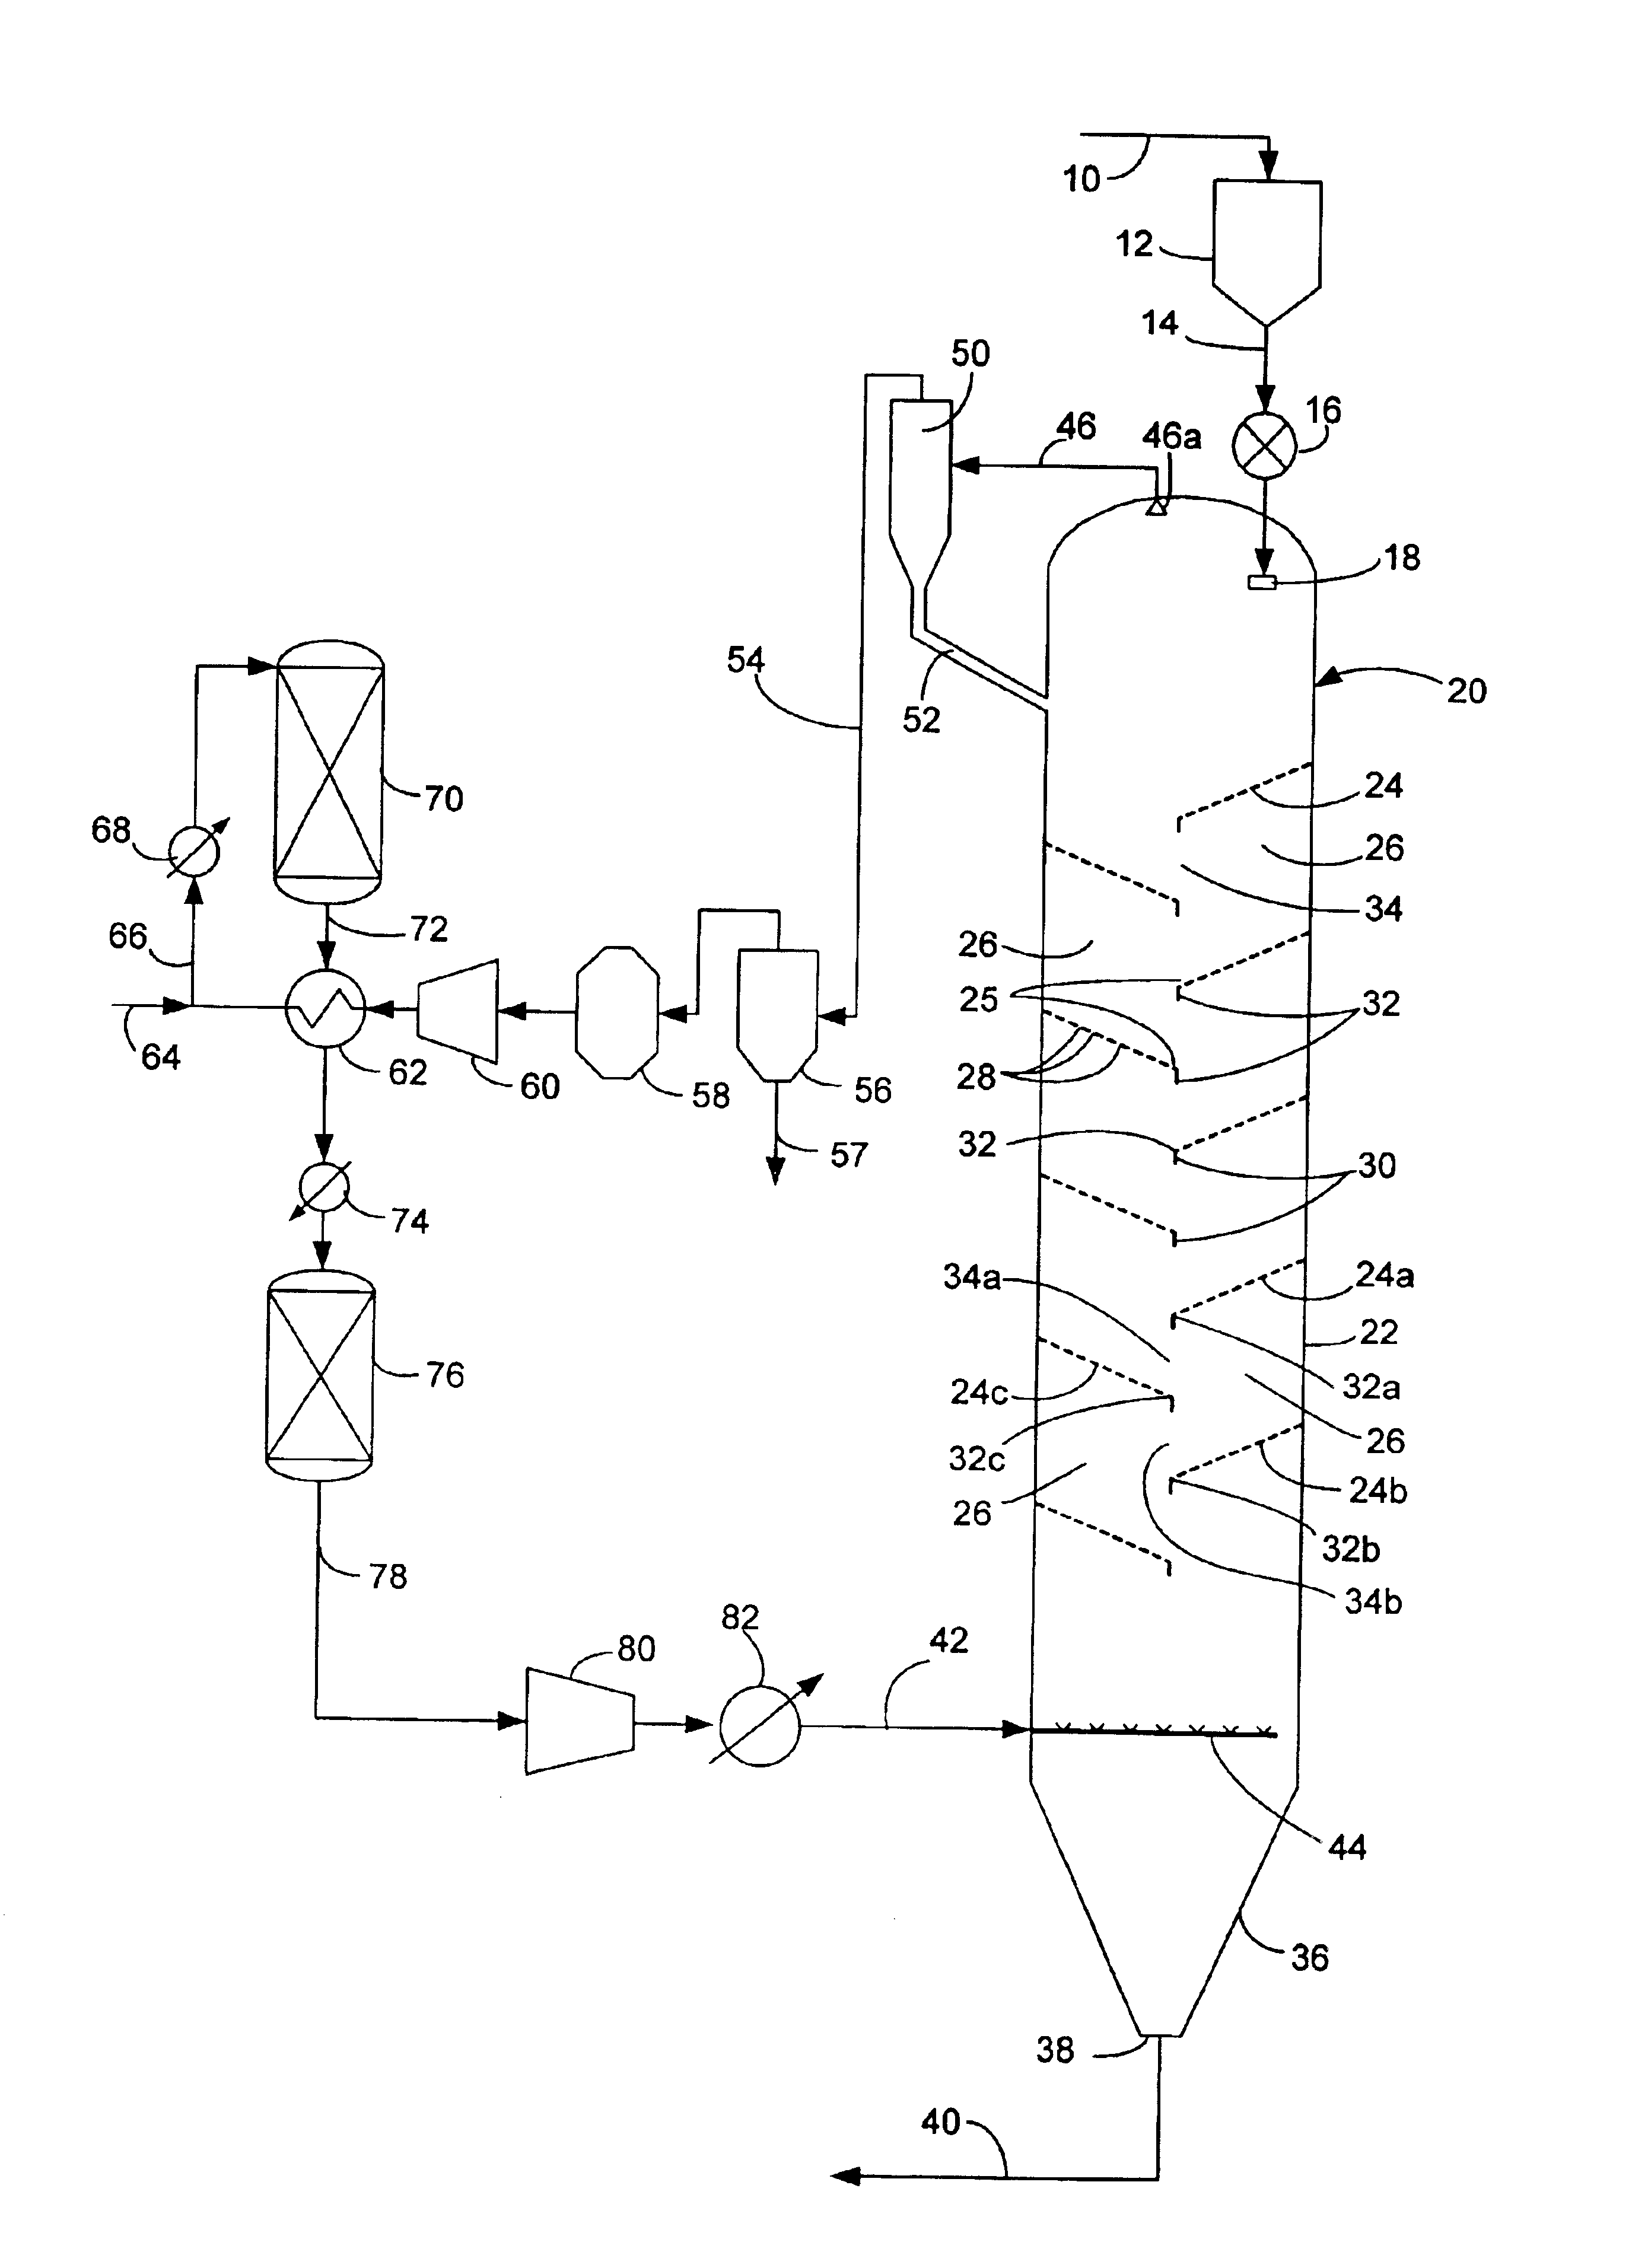 Apparatus and process for continuous solid-state poly-condensation in a fluidized reactor with multiple stages